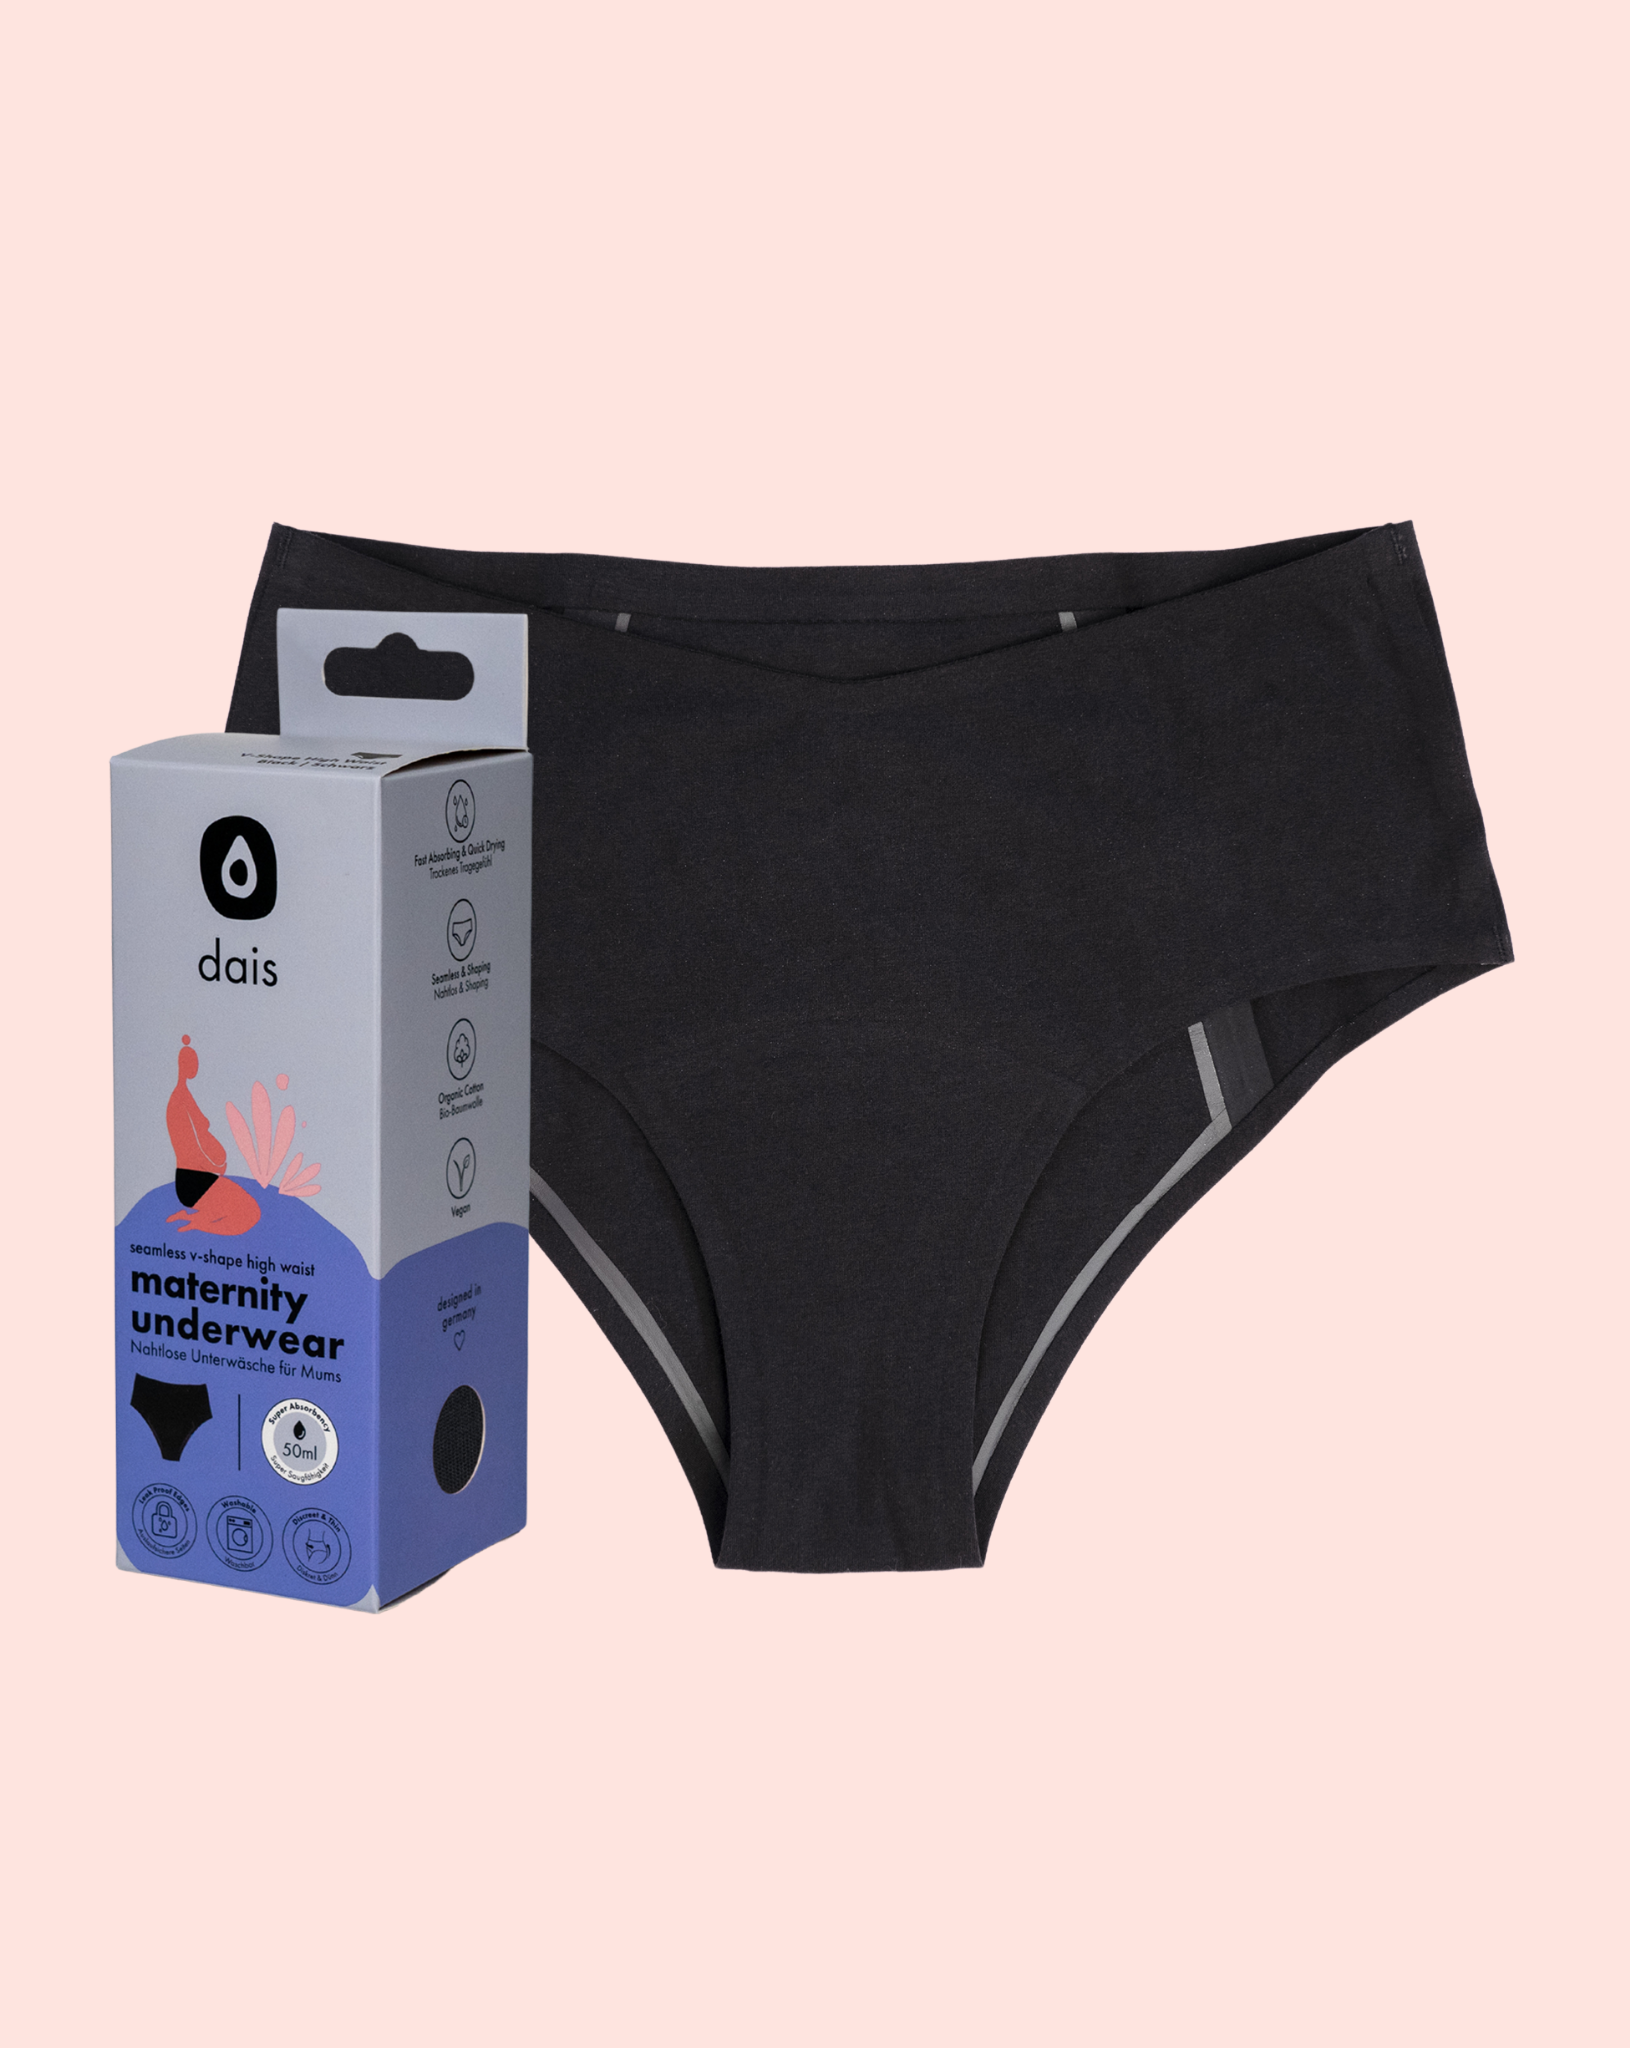 dais maternity absorbent underwear shown with modern packaging to the side.